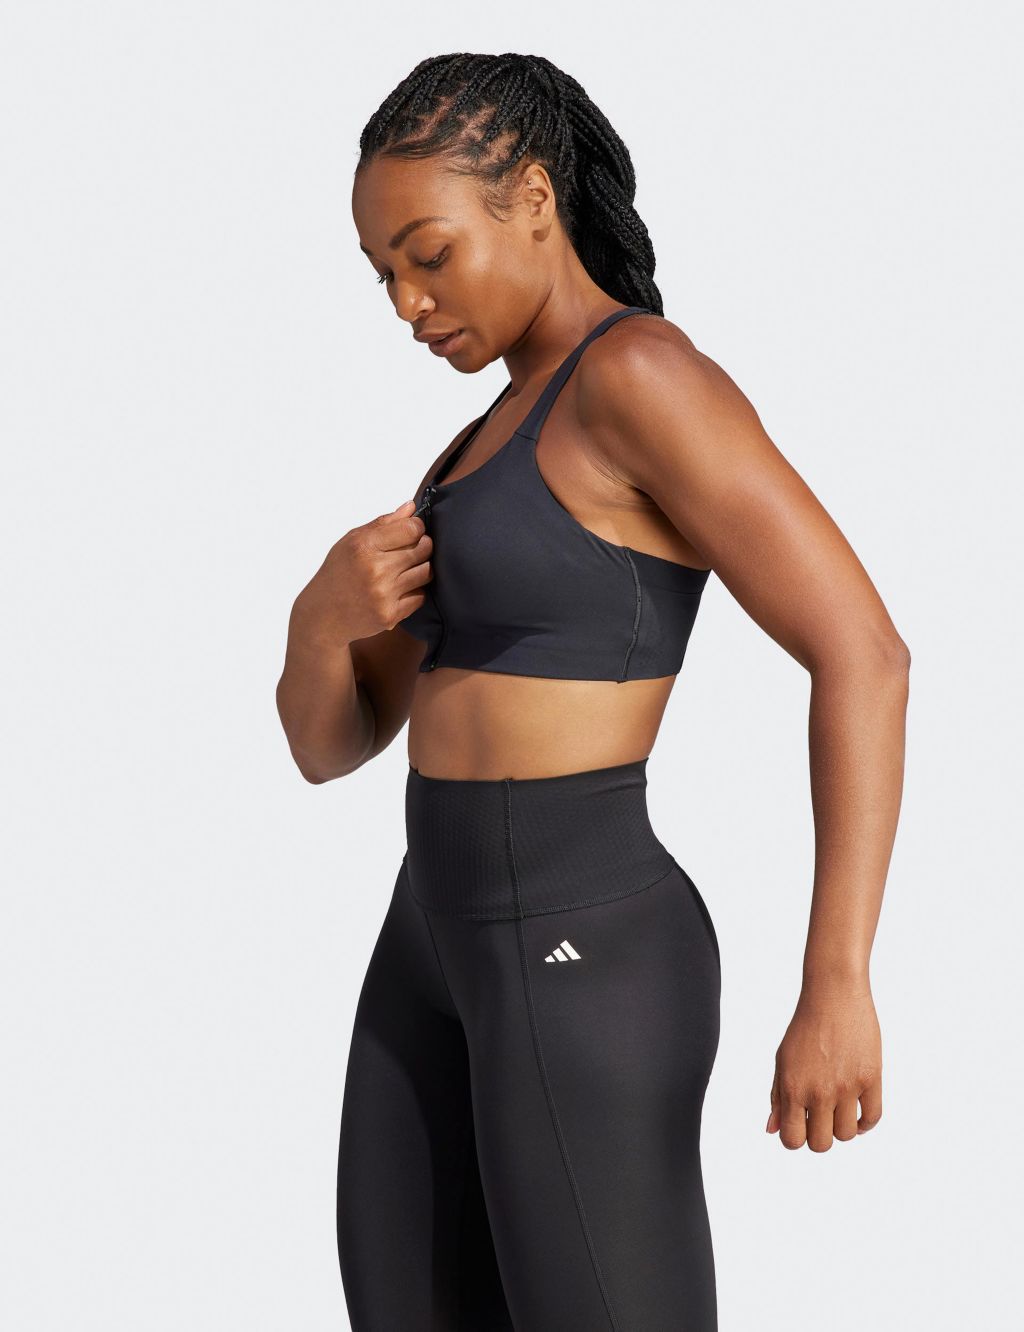 Luxe Lady Fit Launches: The Latest Showstopper Leggings and Sports Bras in  High-End Athletic Apparel